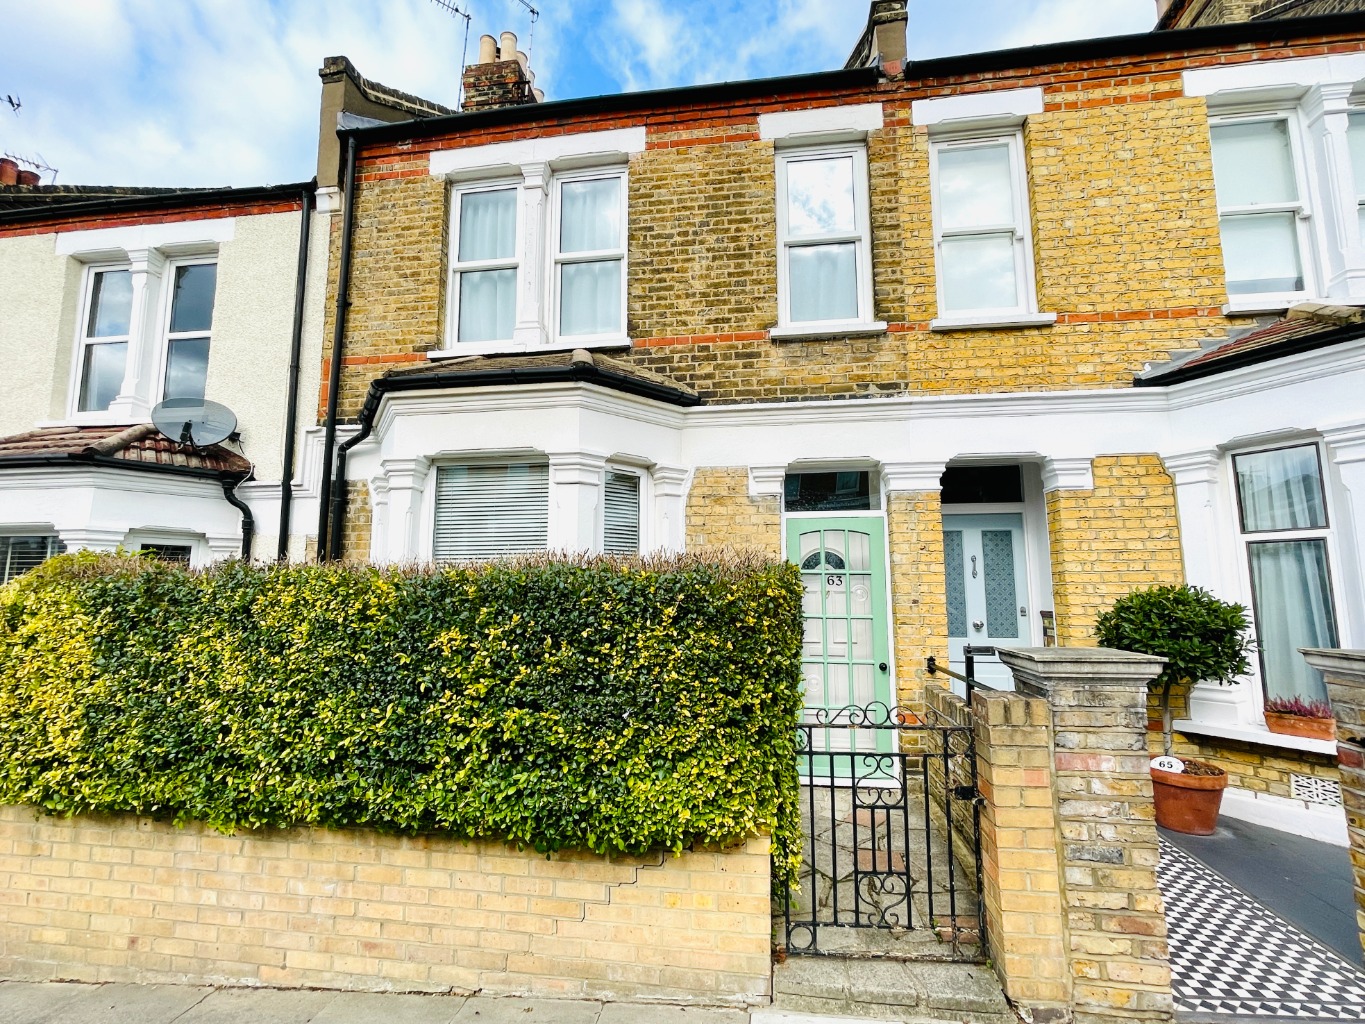 Beaumont Gibbs are offering this clean and tidy three bedroomed Victorian terrace house for sale.  Situated in a very popular and residential road in the Shooters Hill Slopes with the added benefit of being offered chain free.